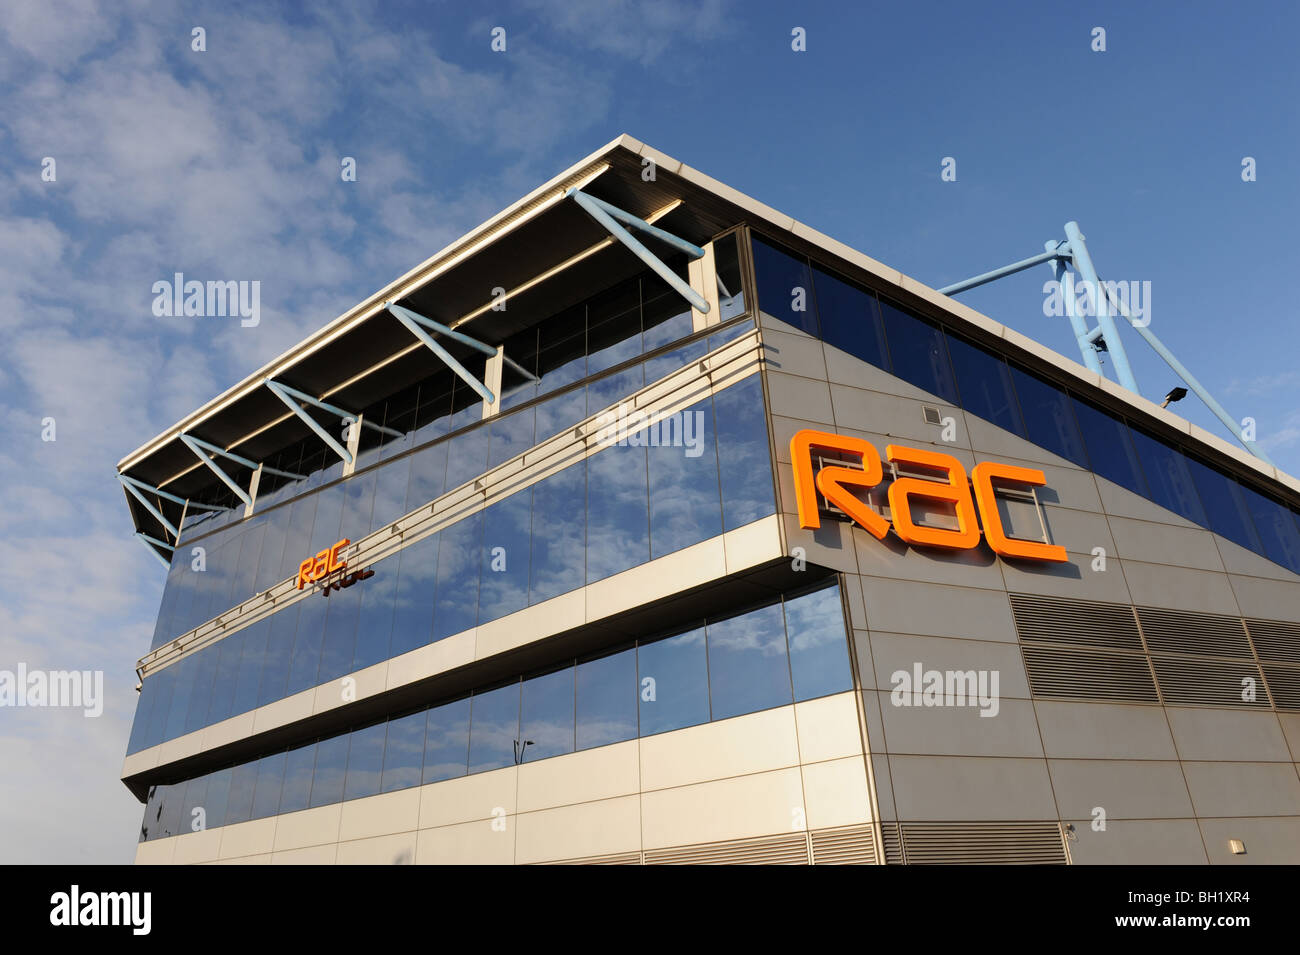 The RAC Centre at Bescot near Walsall England Uk Stock Photo